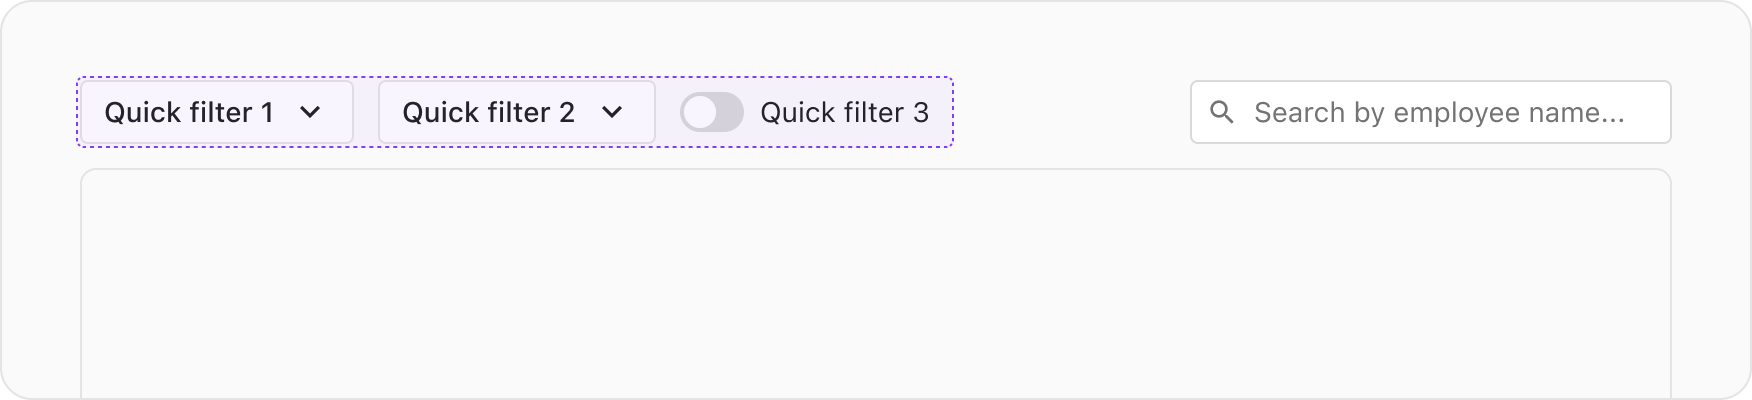 A UI example highlighting the left hand side position of quick filters